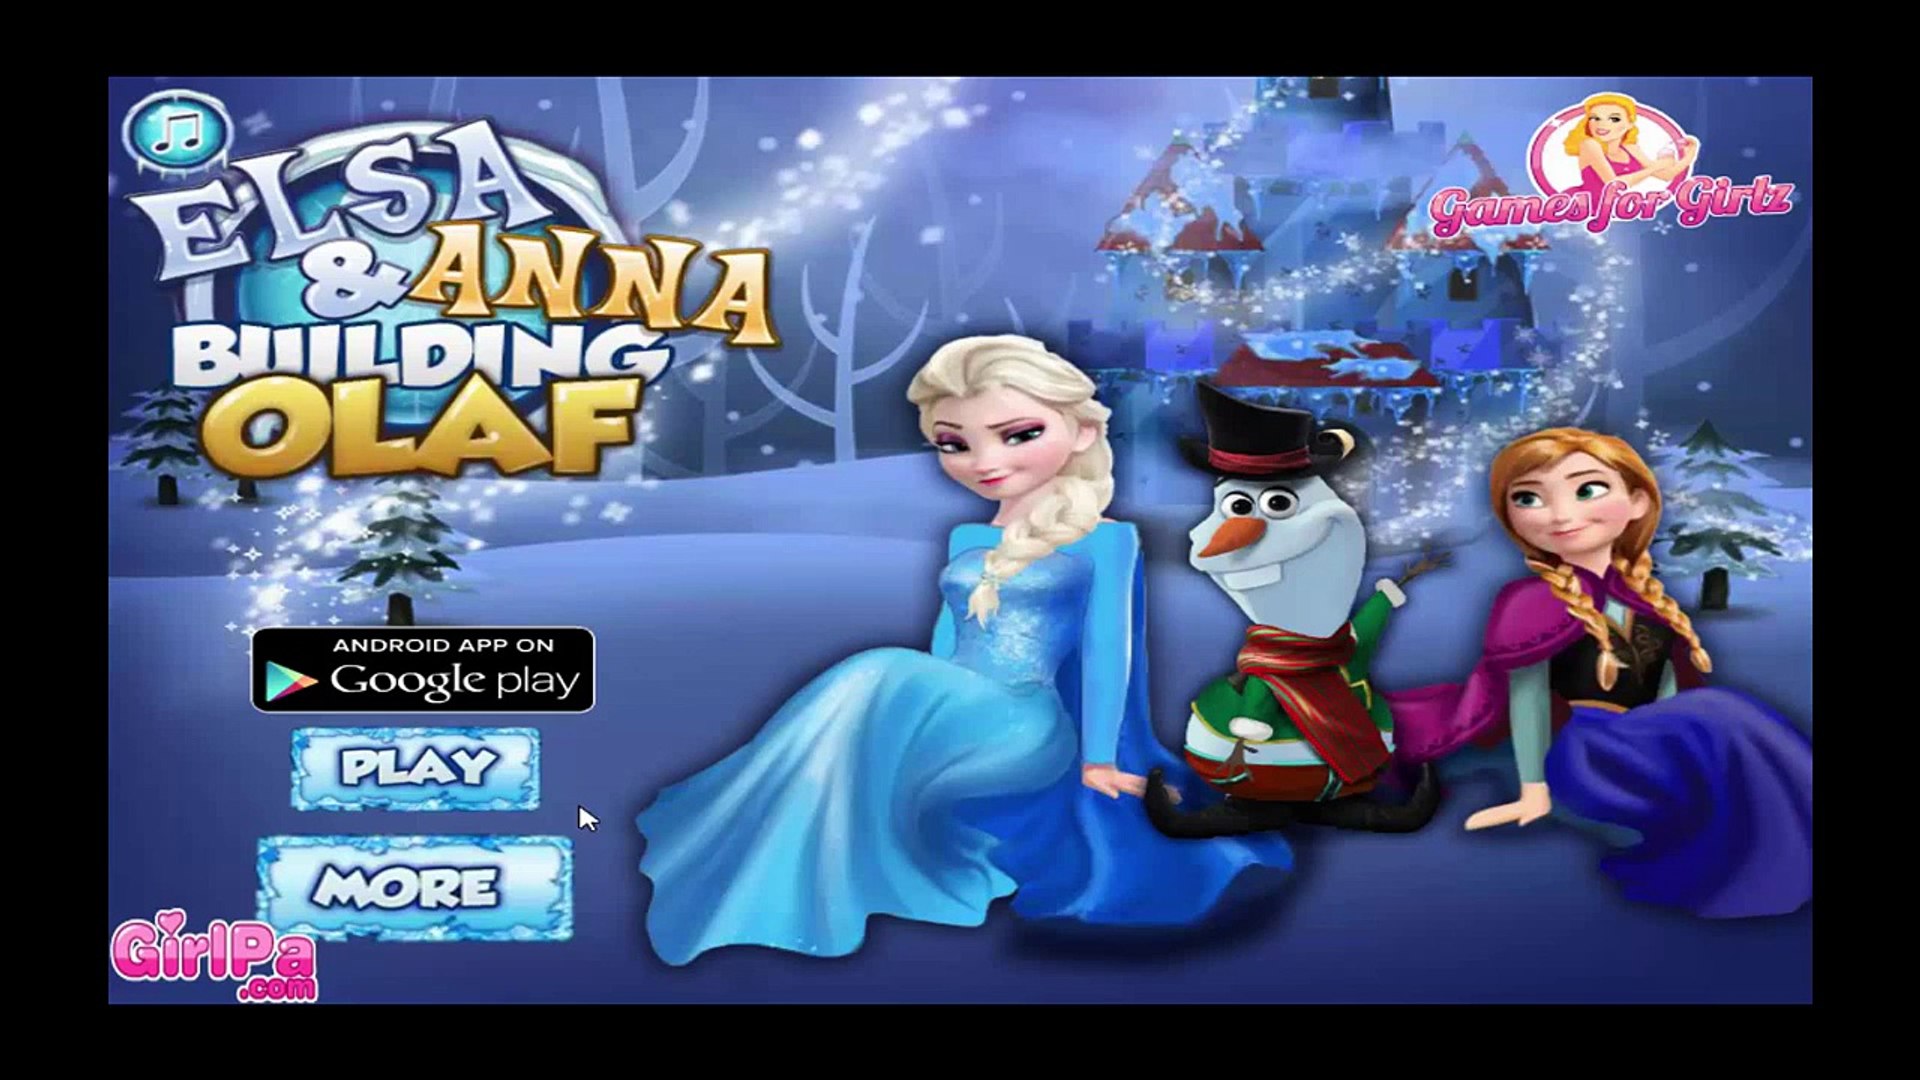 Disney Princess Frozen - Elsa And Anna Building Olaf - Disney Frozen Games  for Girls - video Dailymotion